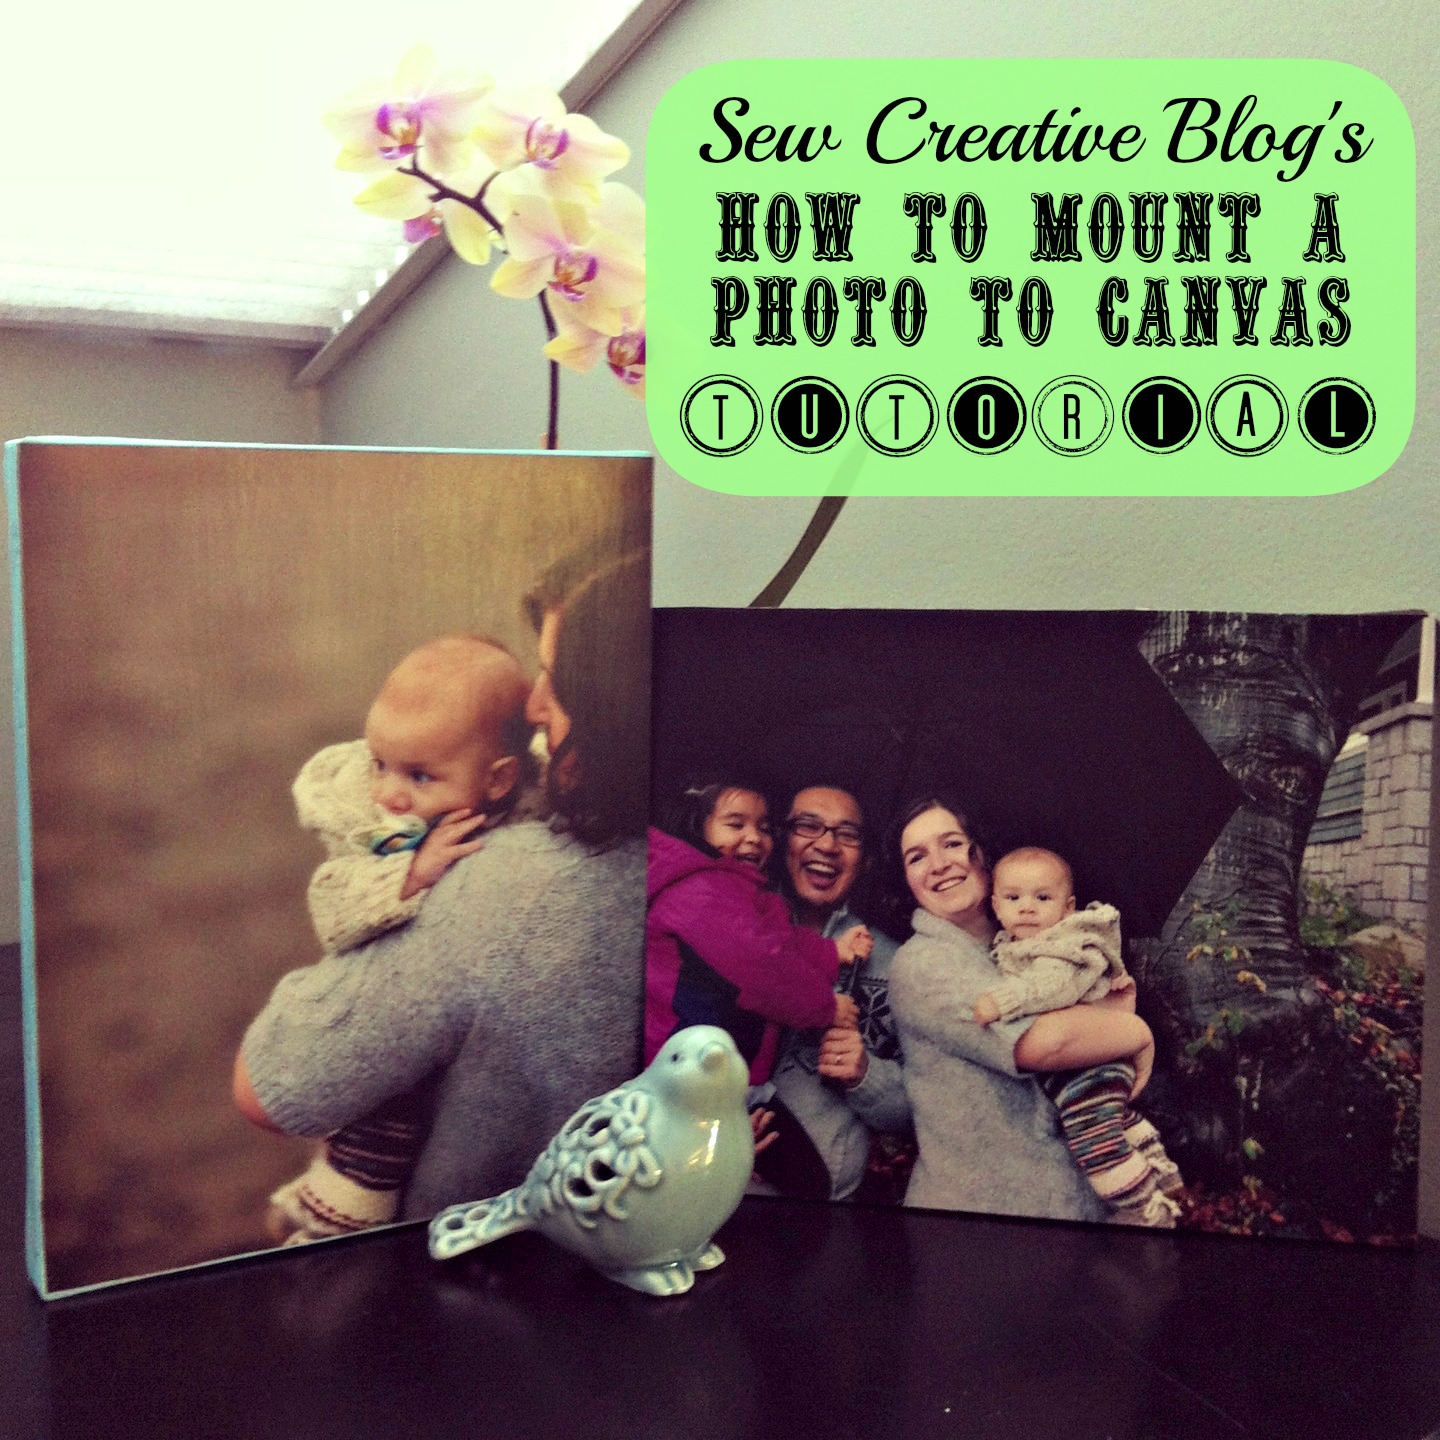 How to mount a photo to canvas tutorial A great handmade gift for under $5.00